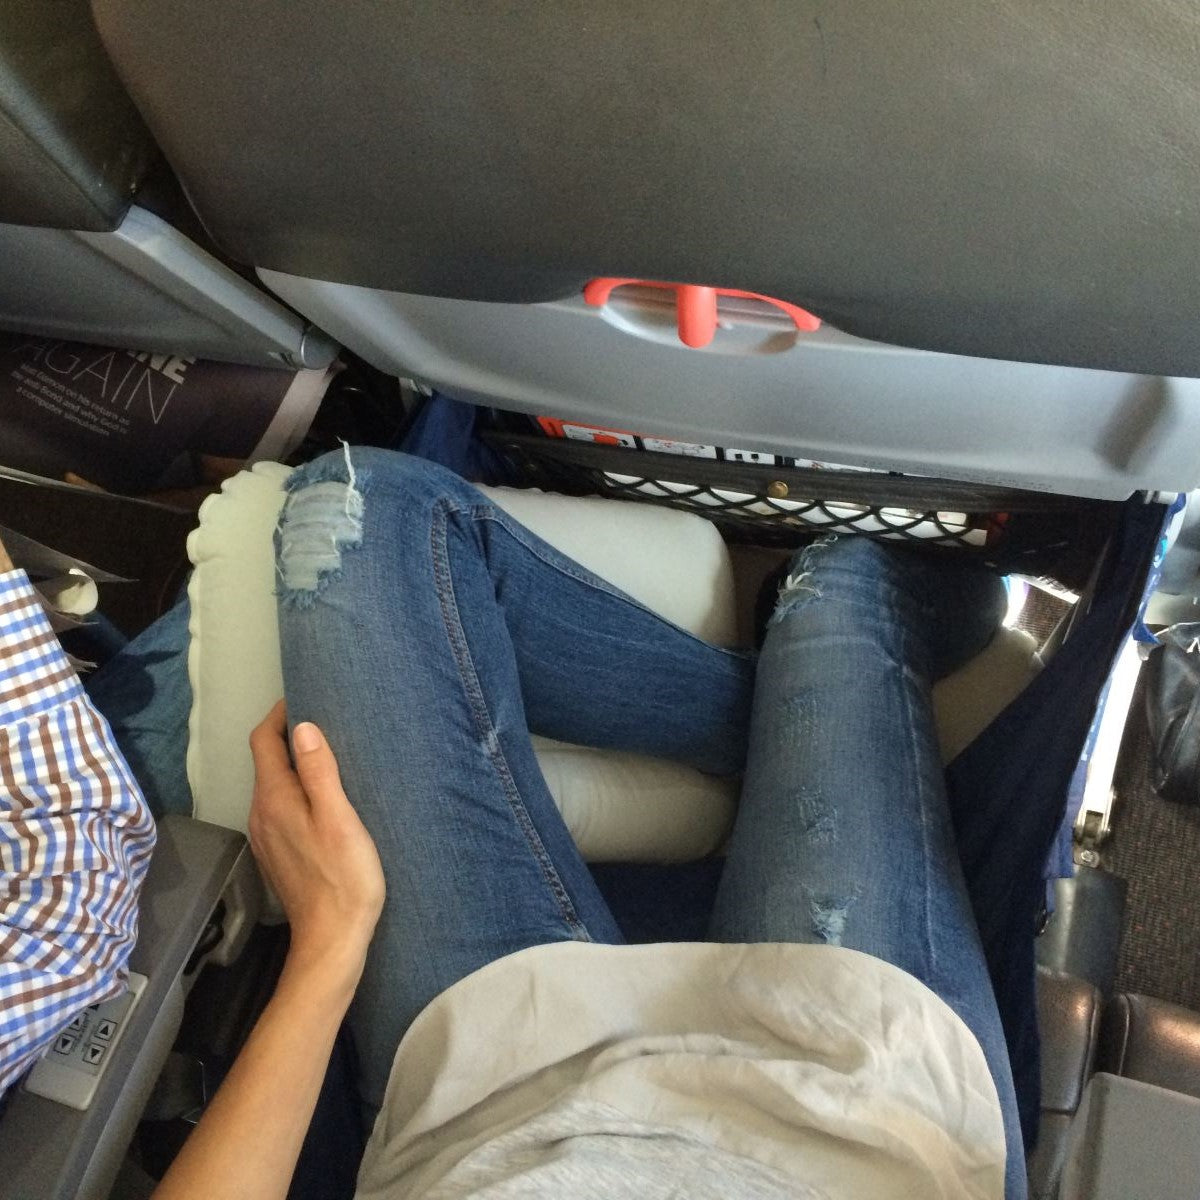 "Would try to stick my toes into the magazine pocket" - Sarah, Jetstar